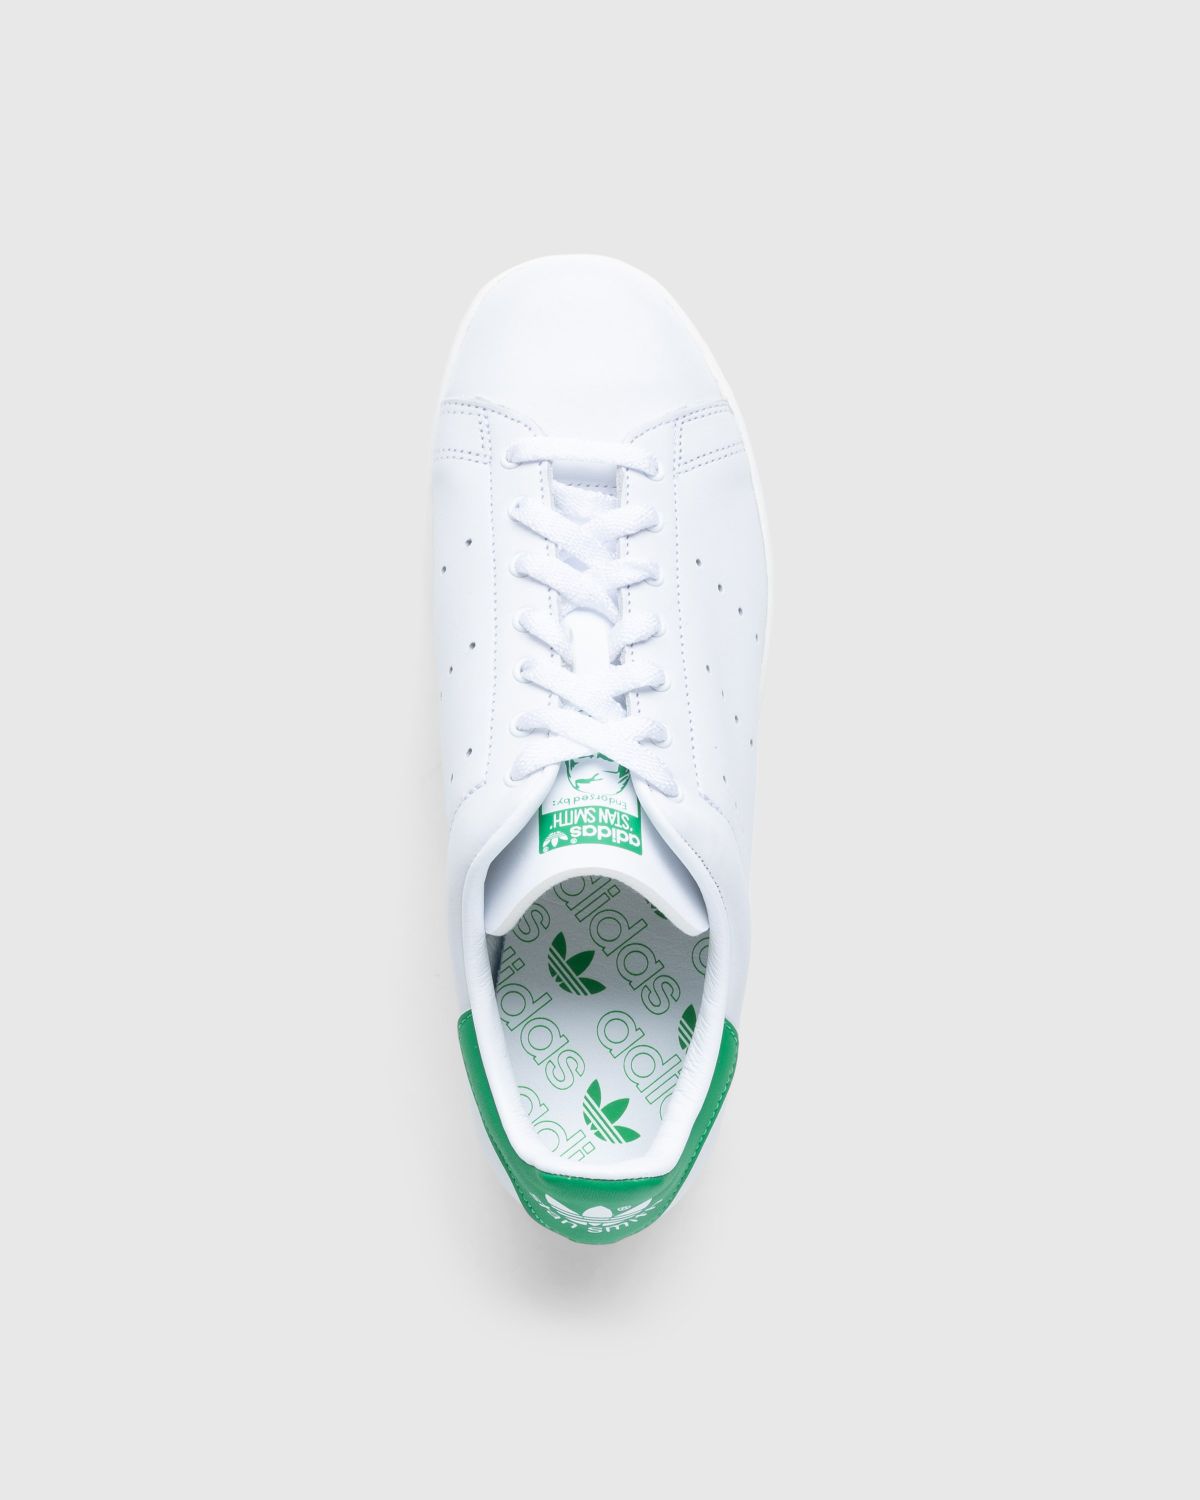 Adidas Stan Smith 80s Sneakers